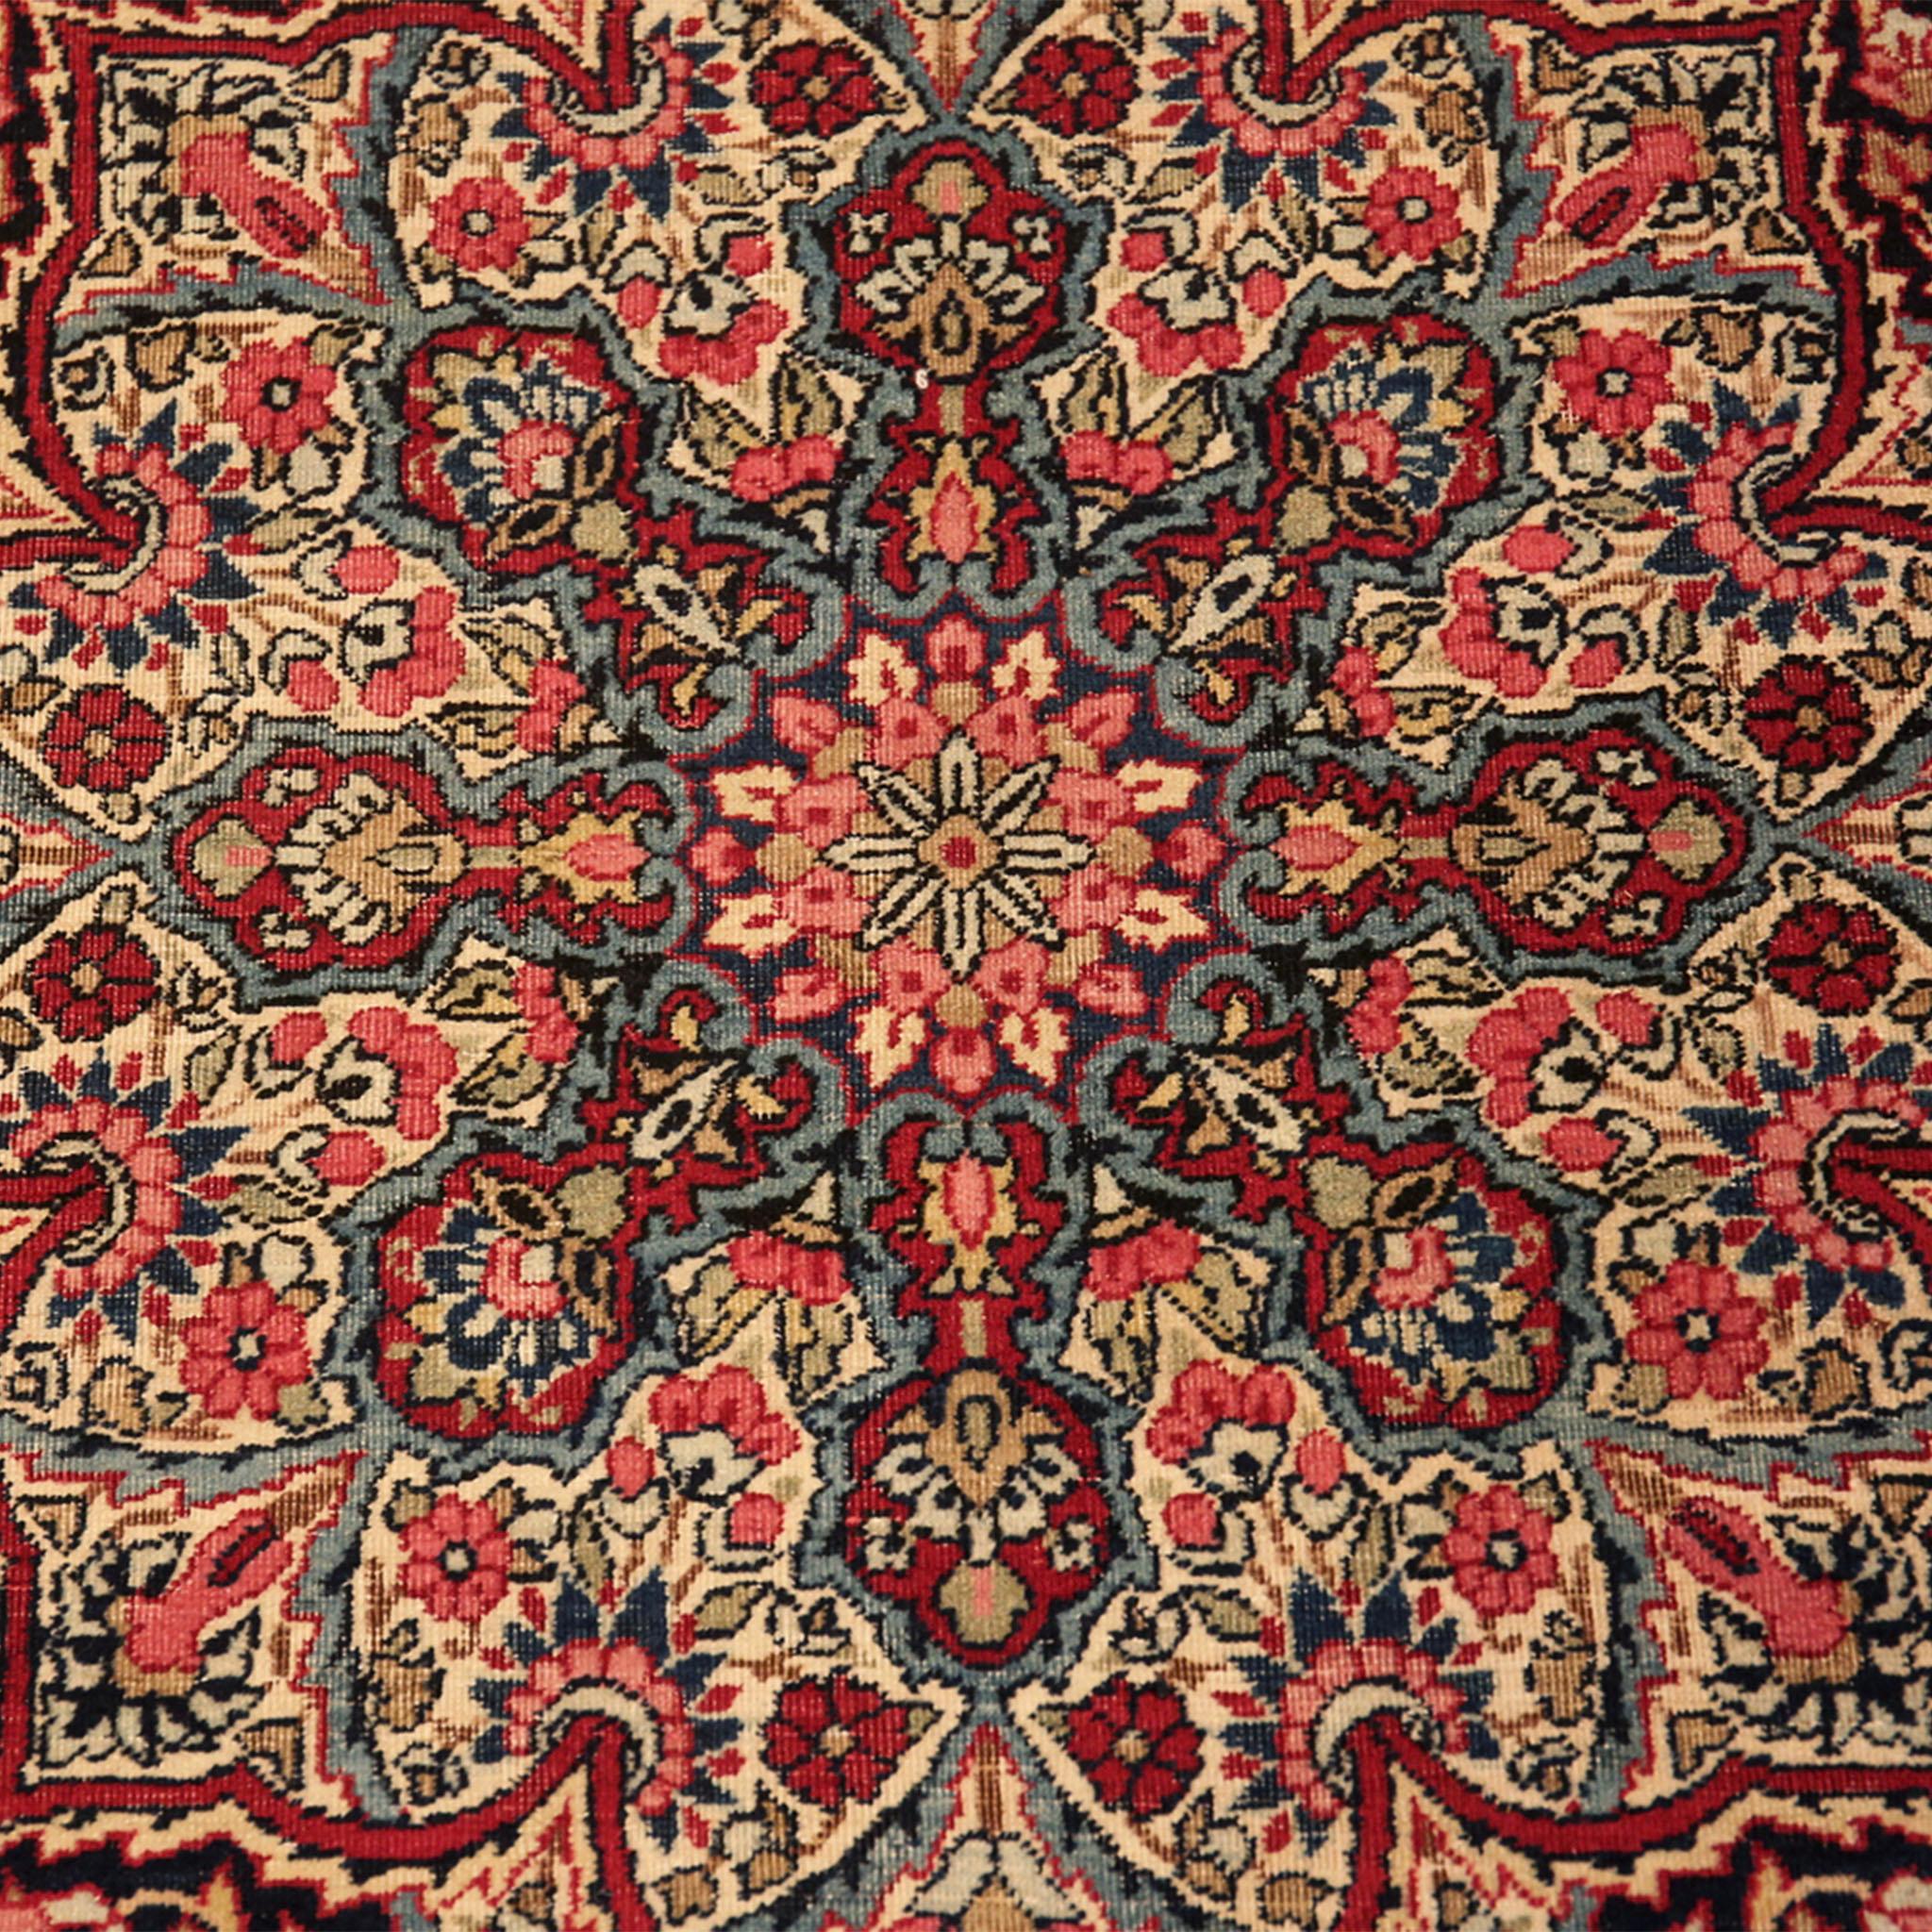 Originating from a city in south Iran, this traditional Persian Vintage Kerman Rug - 4'5